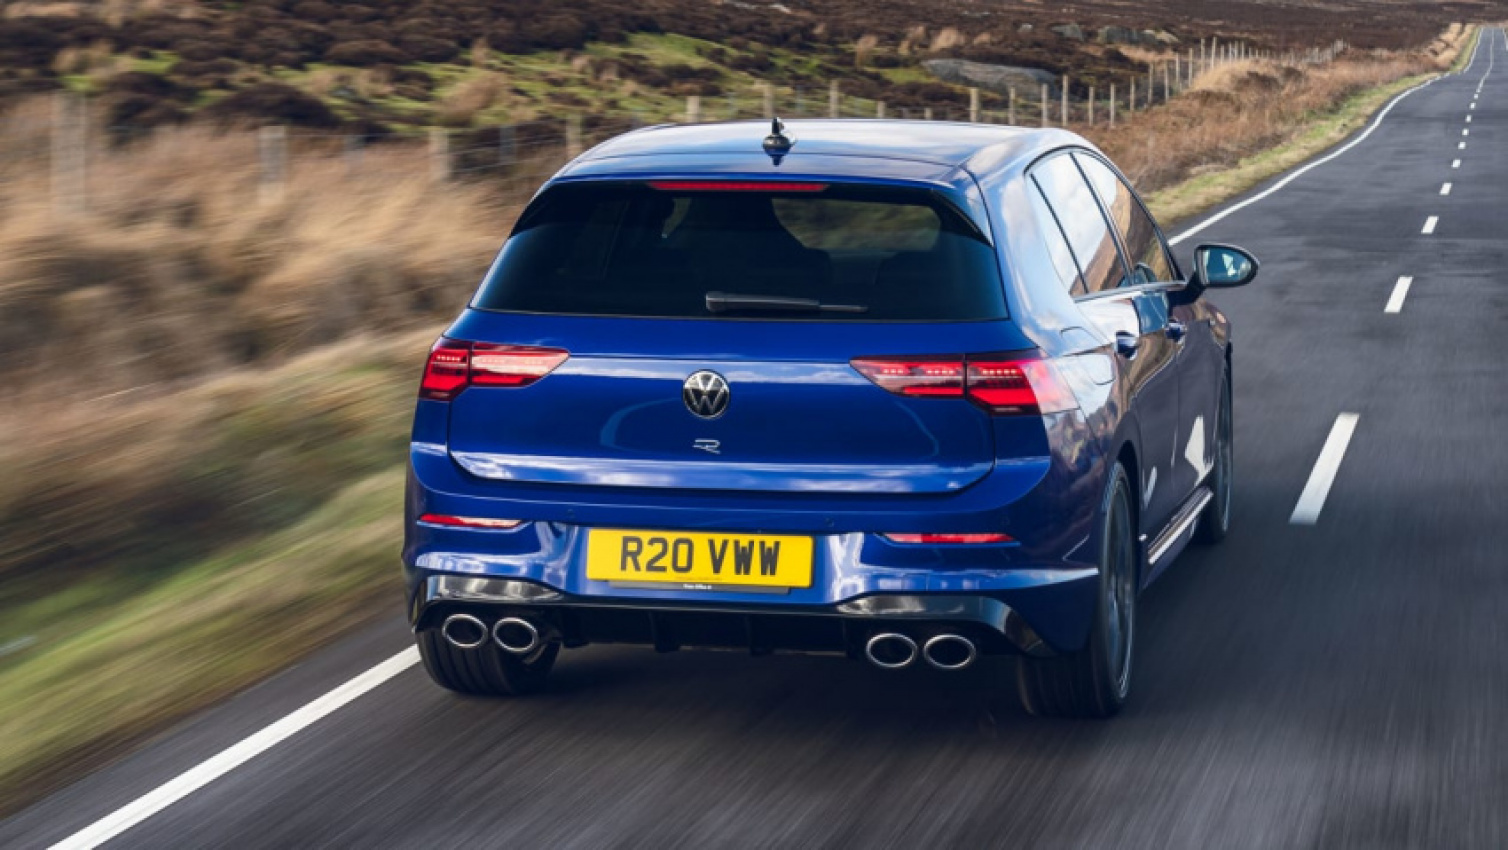 audi, autos, bmw, cars, reviews, compare cars, hot hatches, vw golf r vs audi s3 vs bmw m135i: which should you buy?